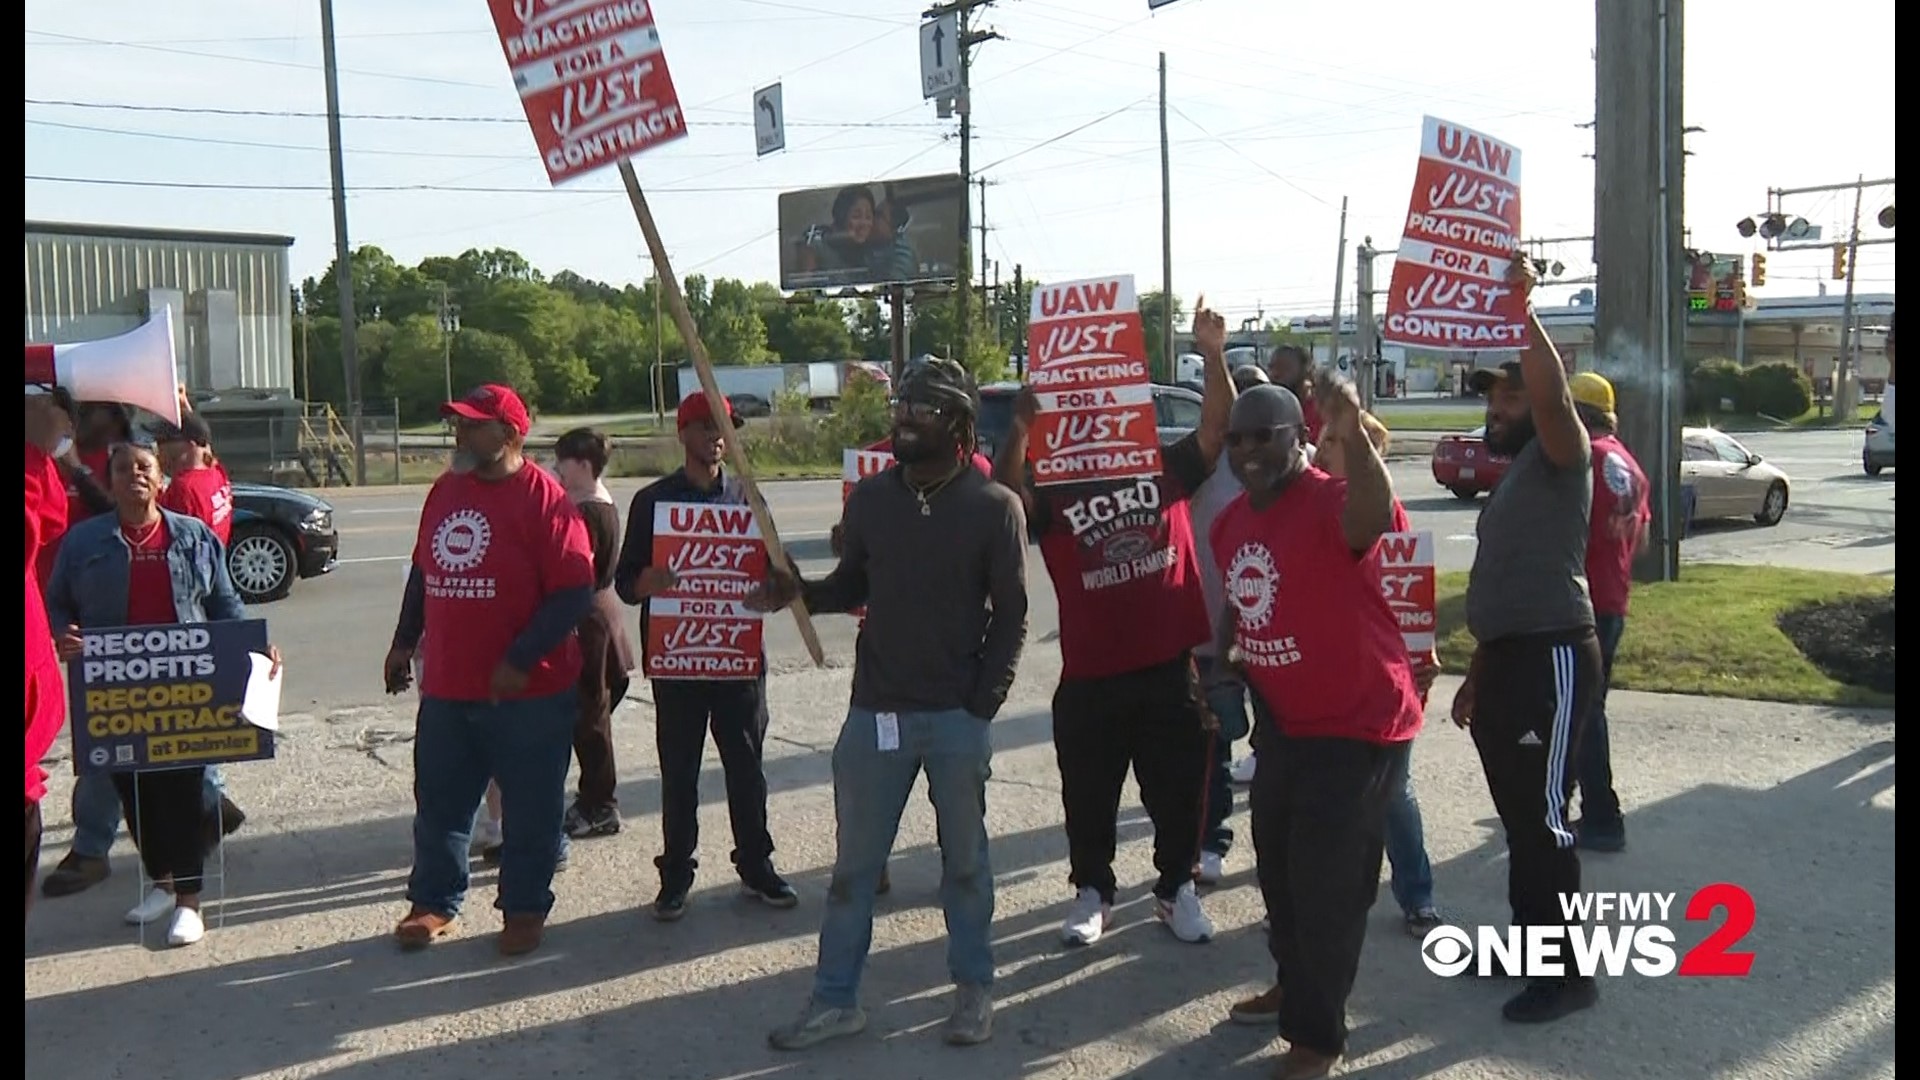 Union warns that Thomas Built Buses' employees could go on strike soon.